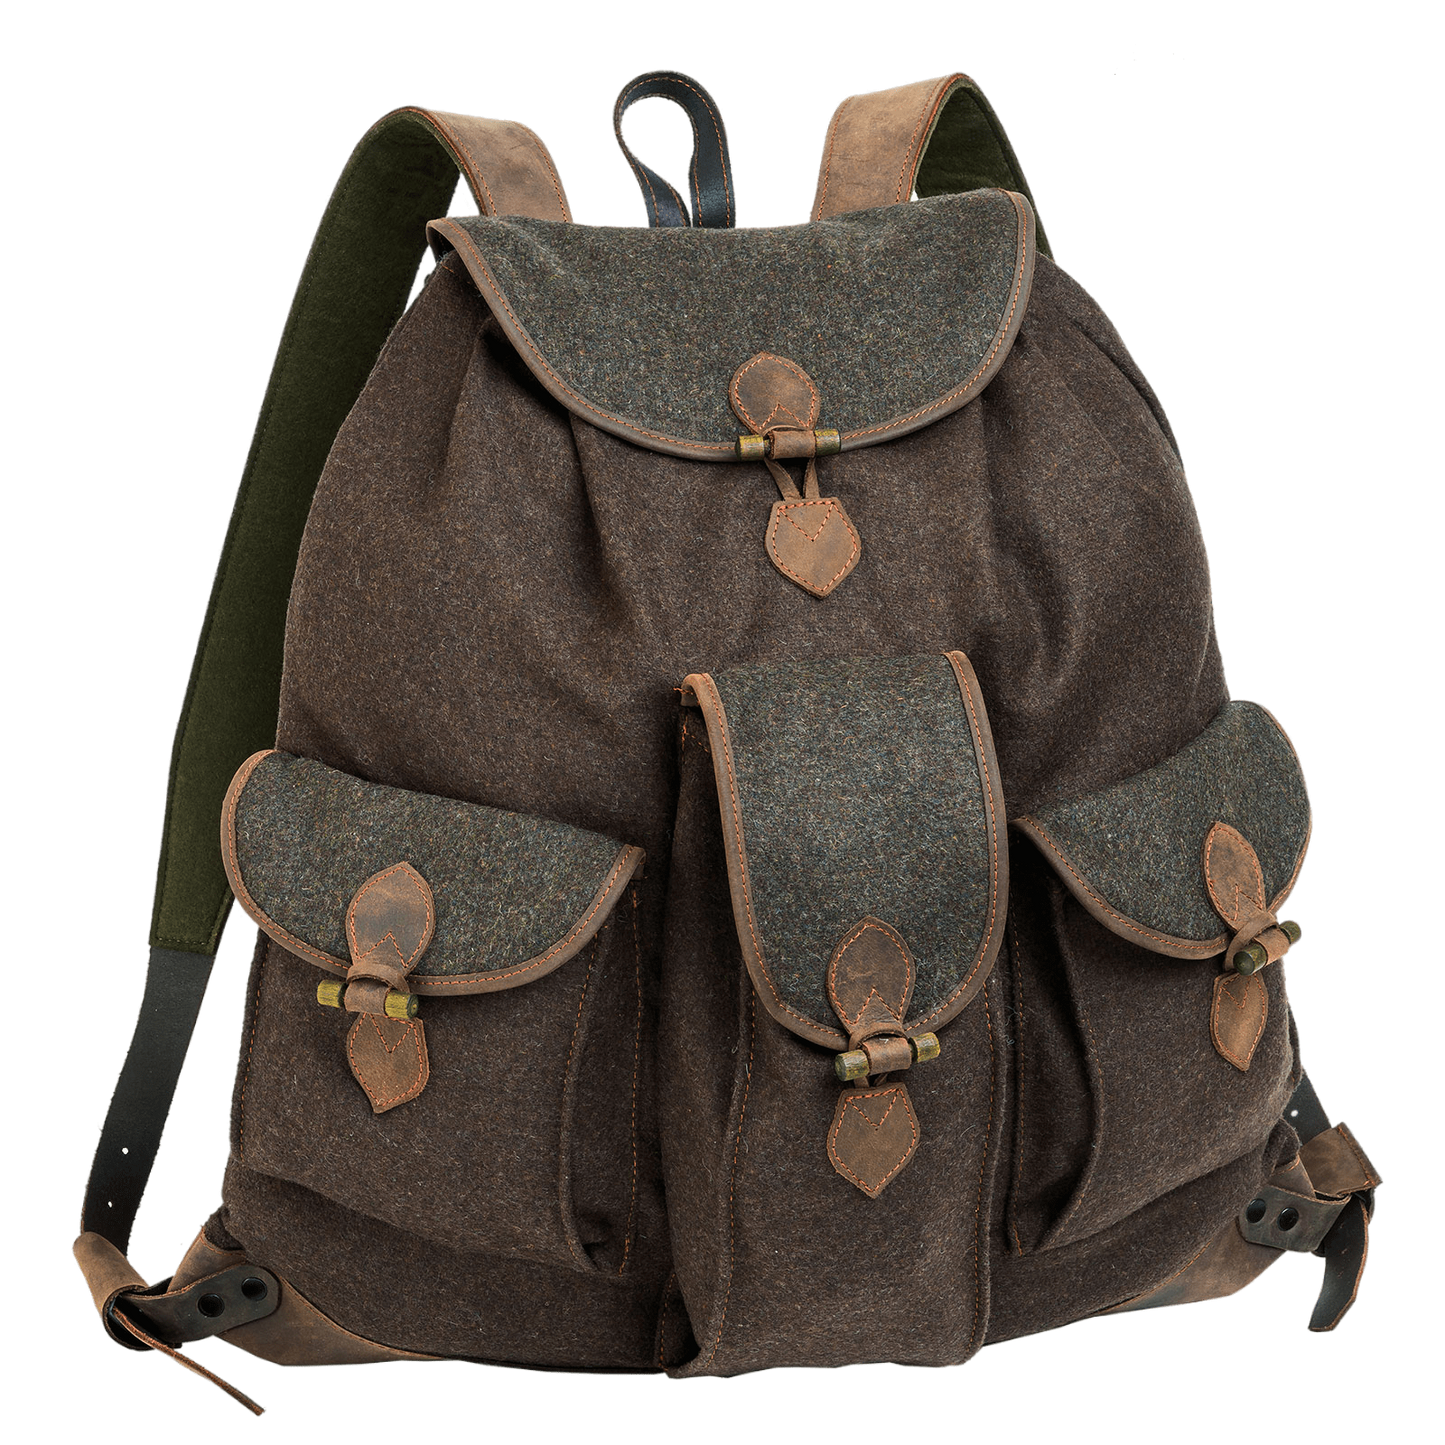 AKAH - hunting backpack made of loden and leather